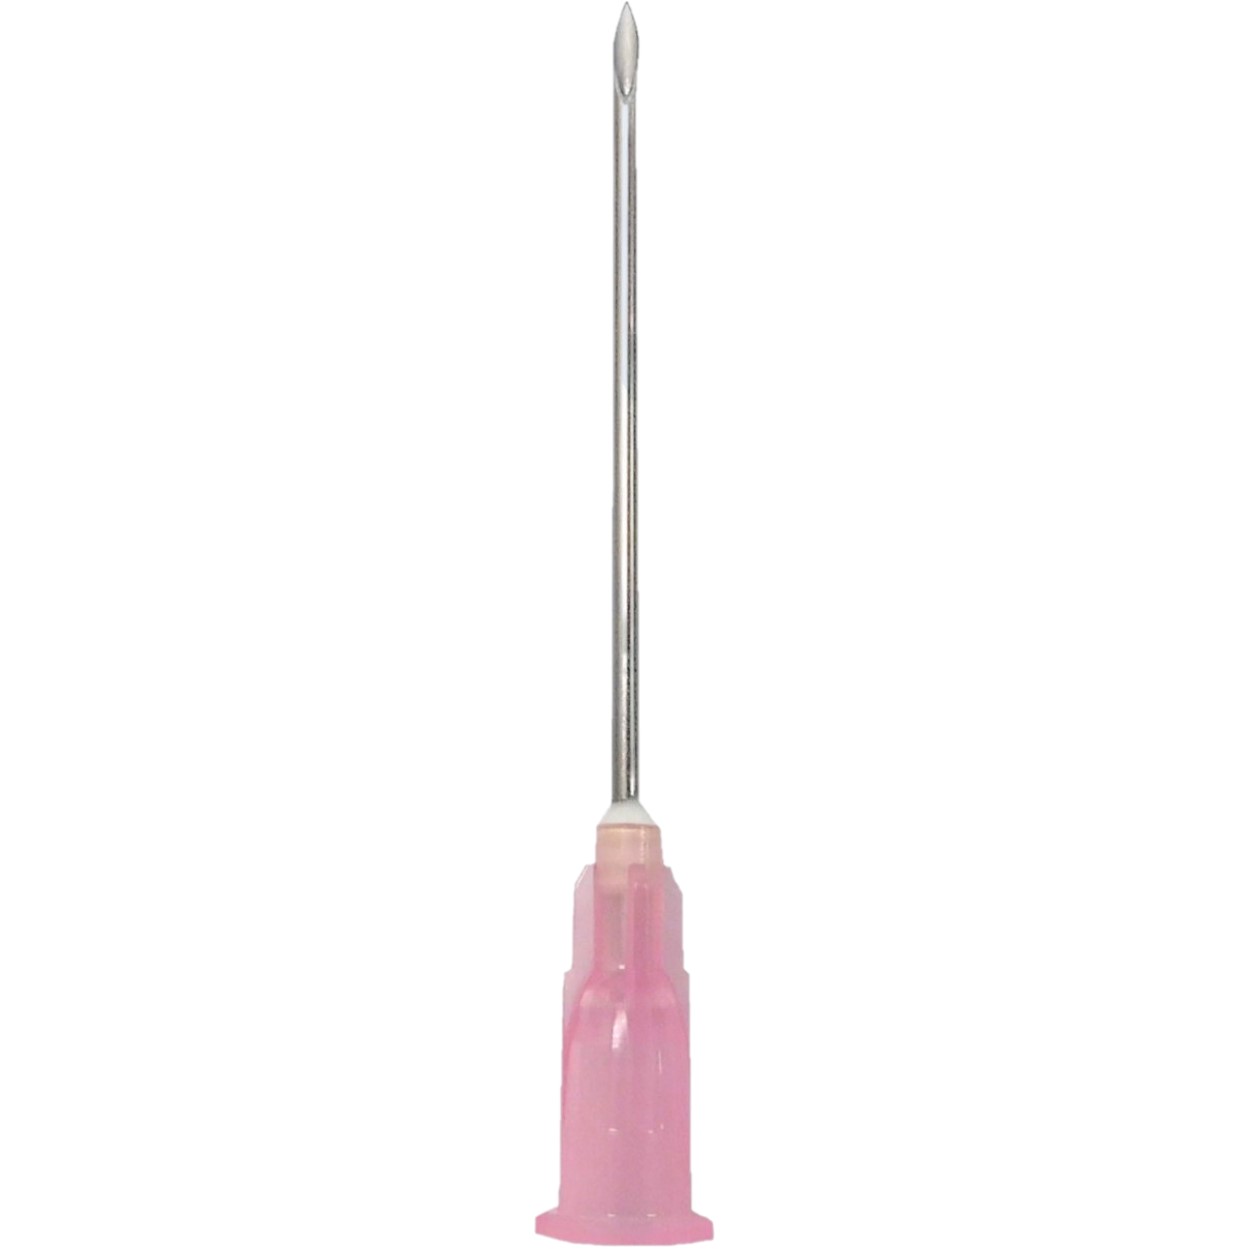 Needle Hypodermic Without Safety 18 Gauge 1-1/2  .. .  .  